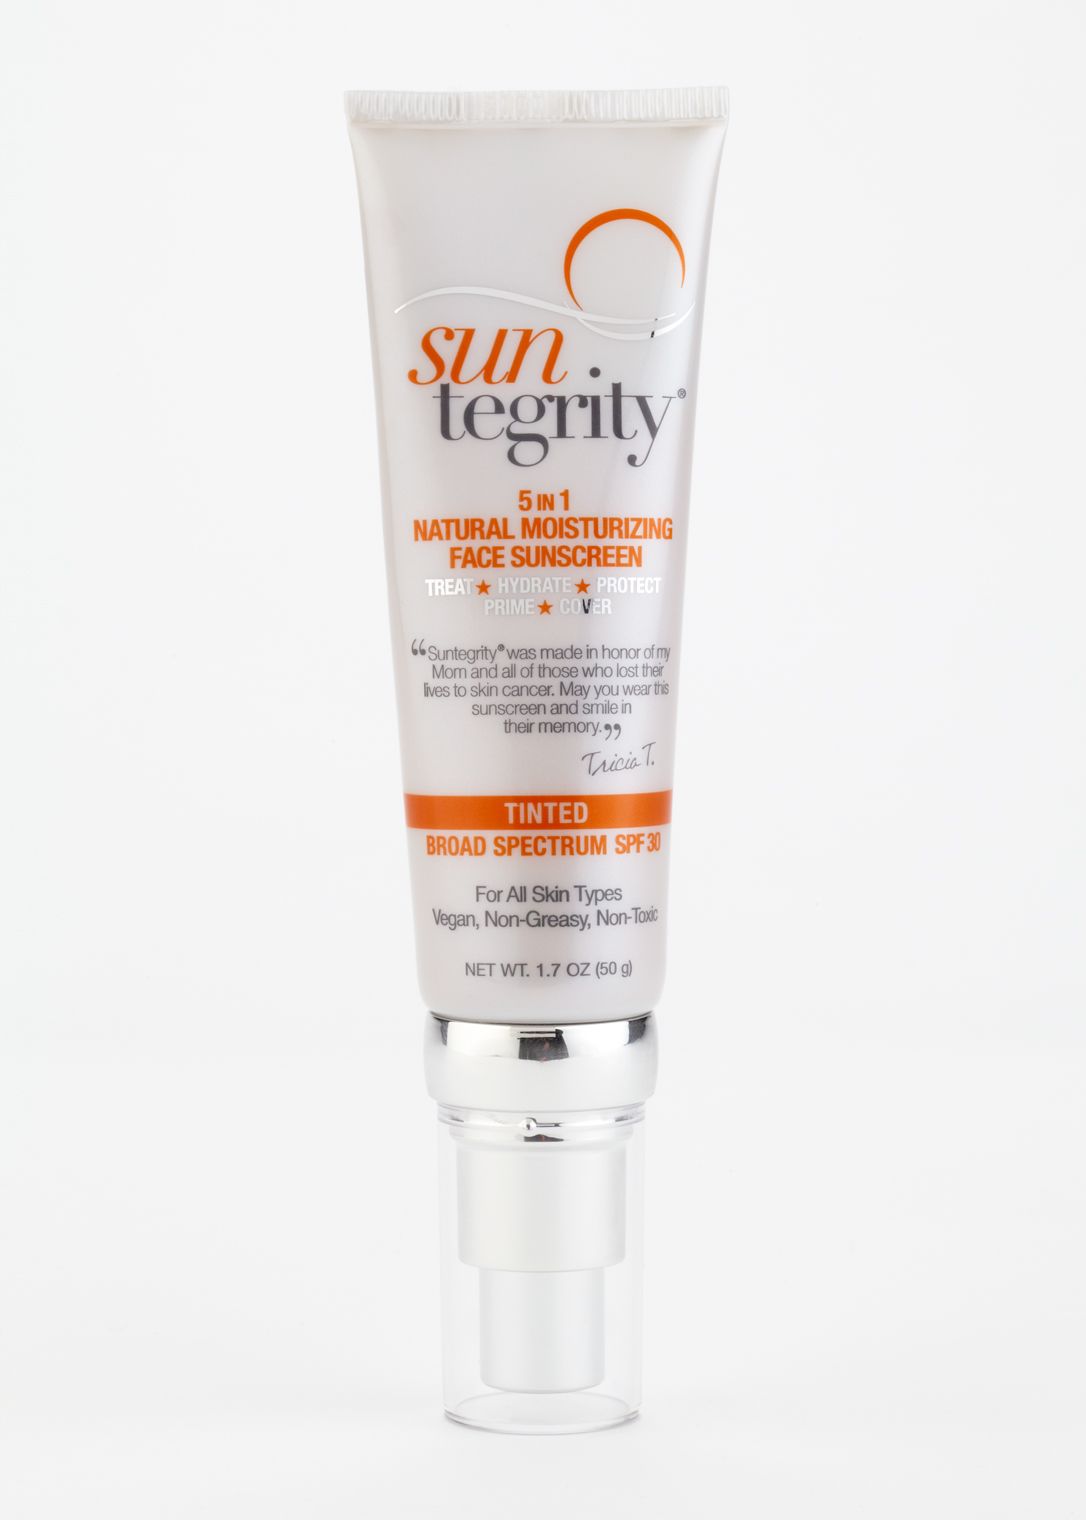 Toxin Free, Tinted BB Cream SPF 30 by Suntegrity $45